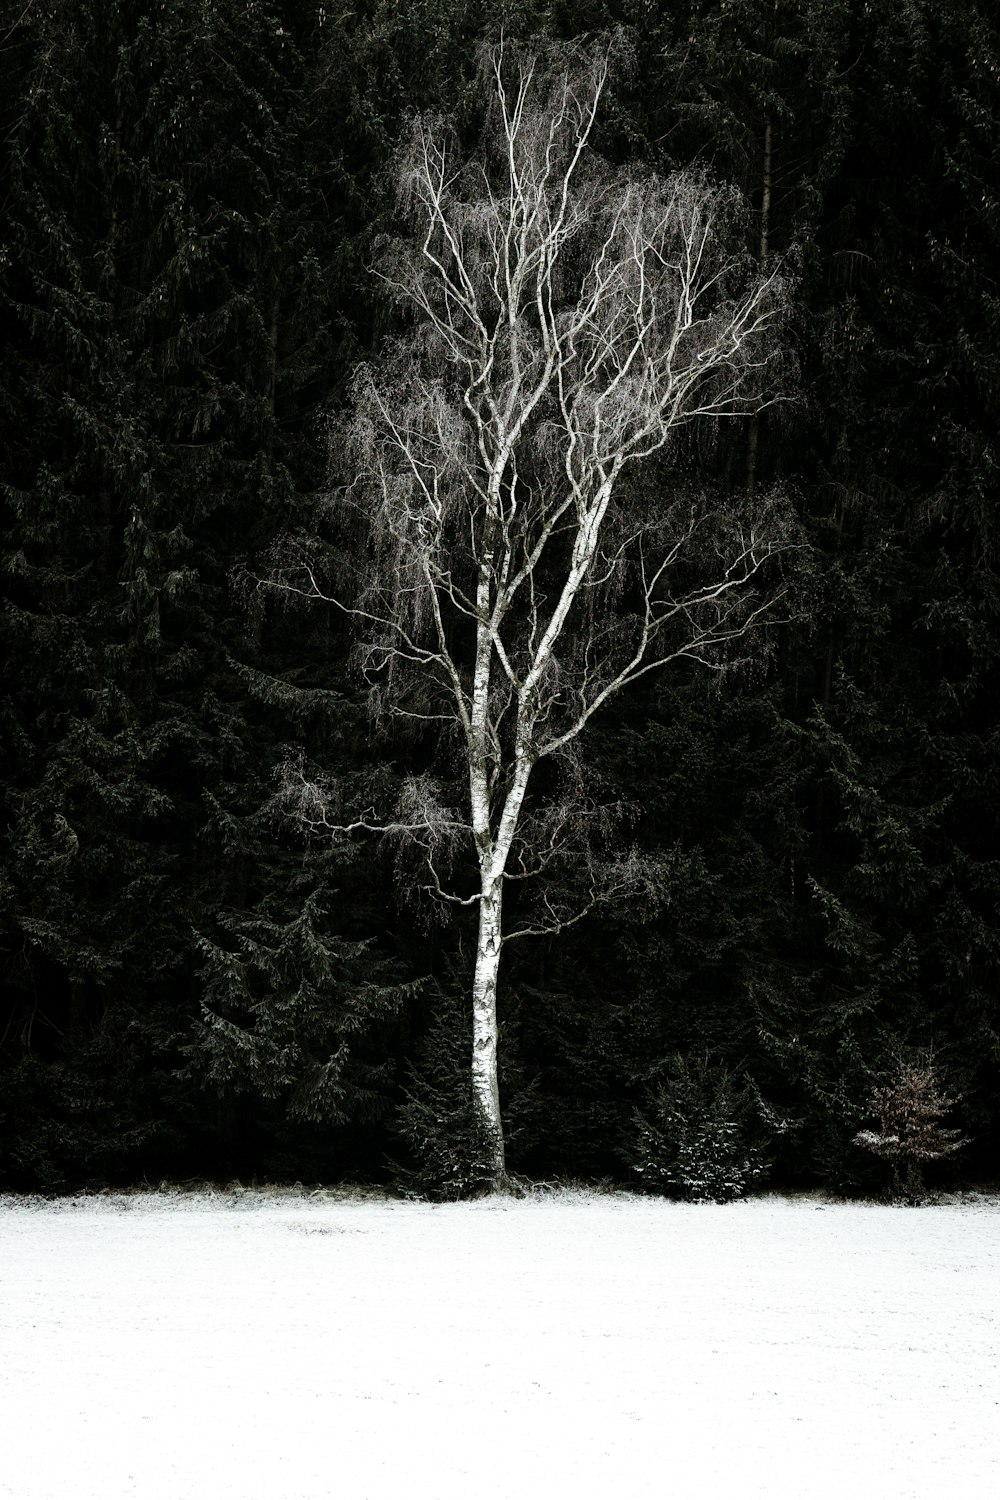 grayscale photography of bare tree near snowy field